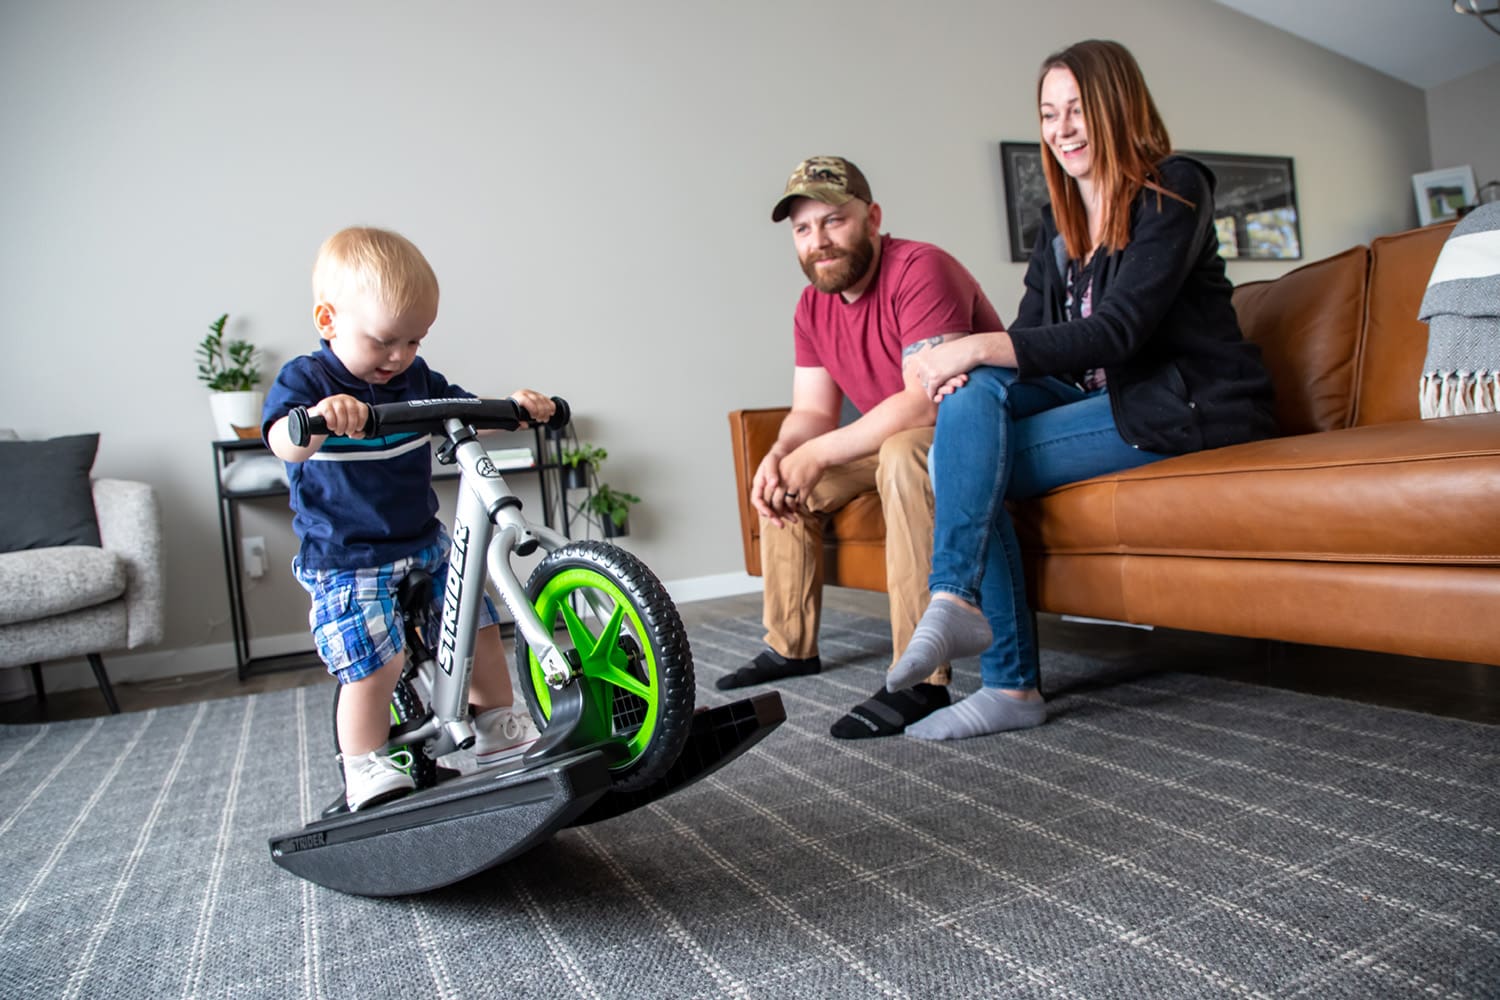 Parents watch from the sofa as their child plays on a silver Strider Pro Rocking Bike